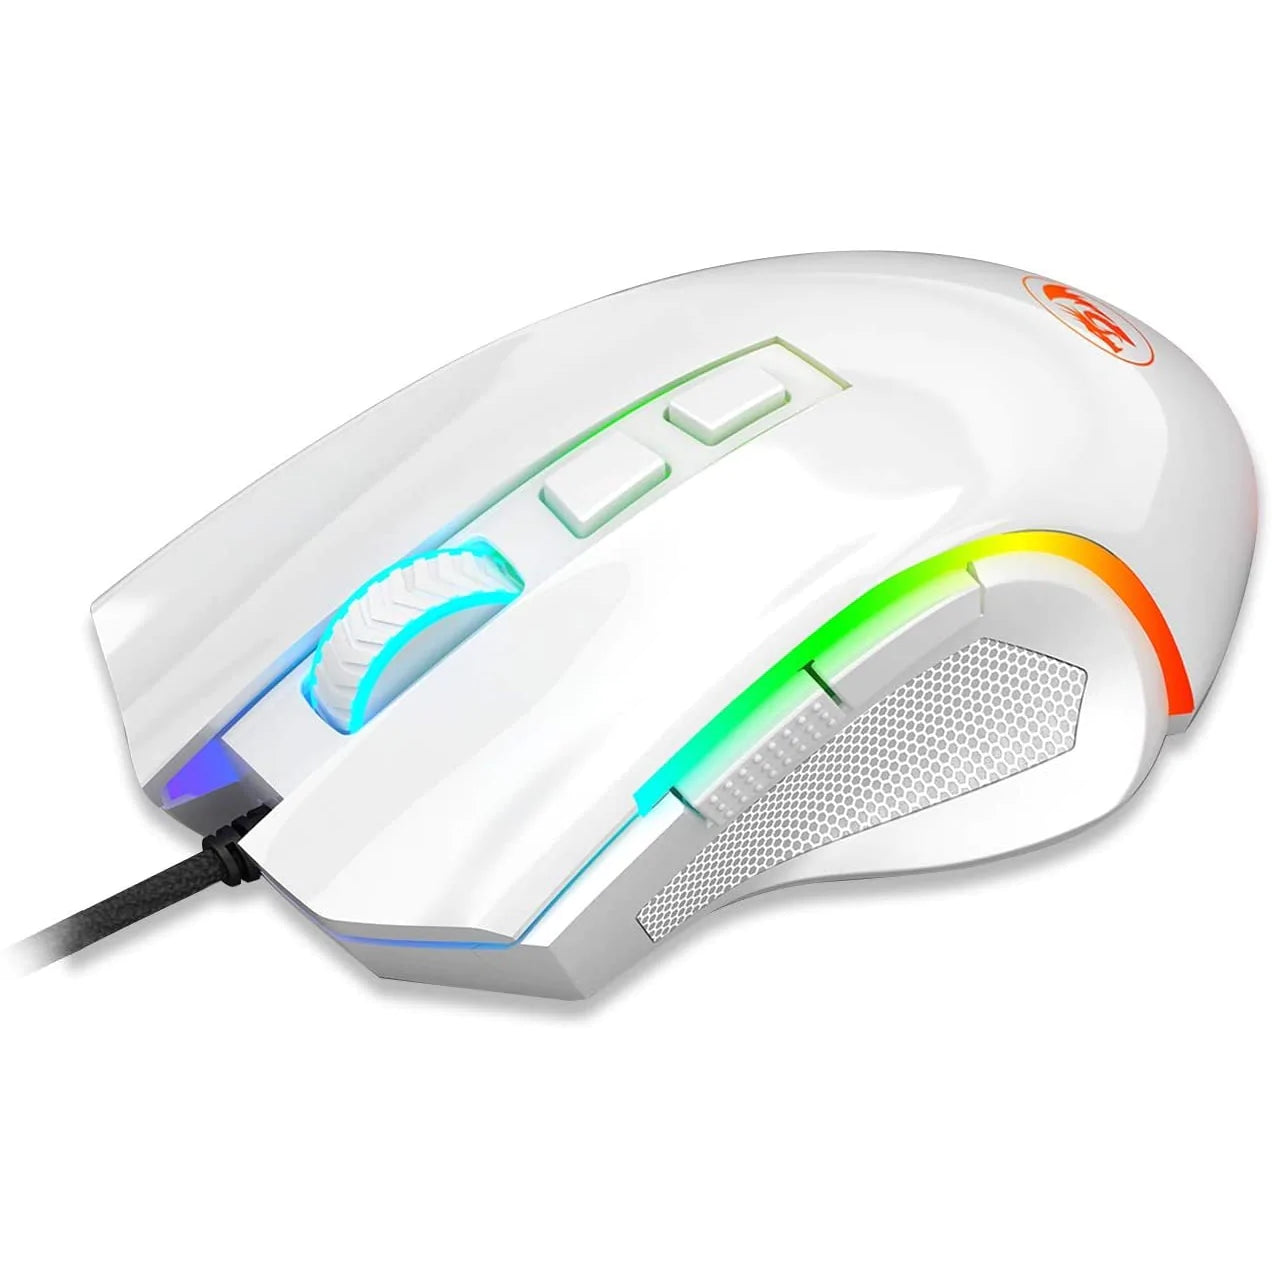 Redragon M607W Griffin White Wired USB Gaming Mouse with 7 Programmable Buttons / 7200 DPI / RGB Lighting for Windows/Mac PC